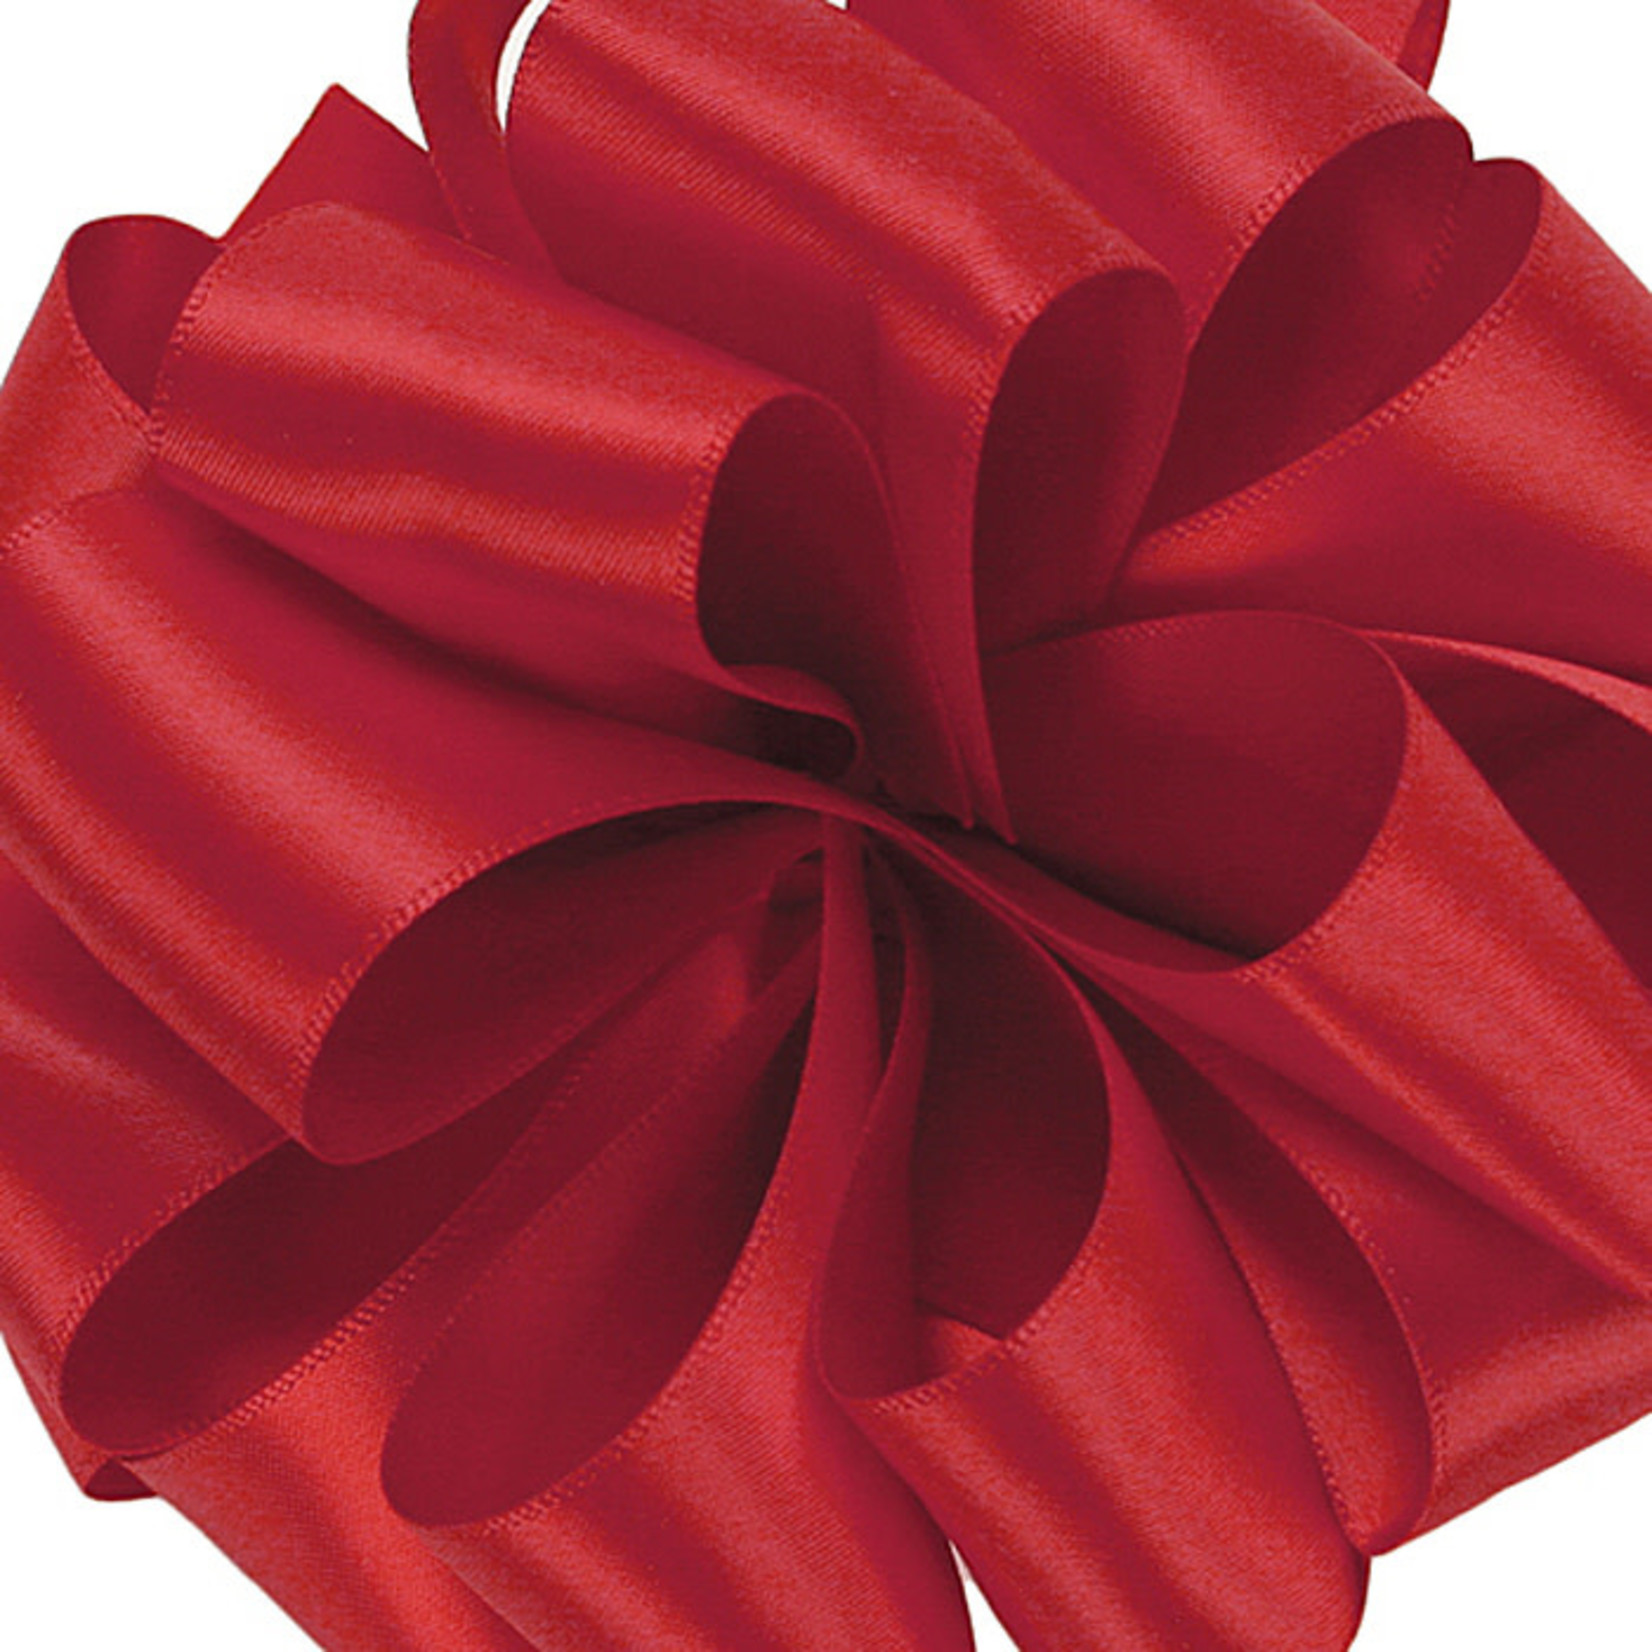 #9, 50 YD DOUBLE FACE SATIN RED RIBBON